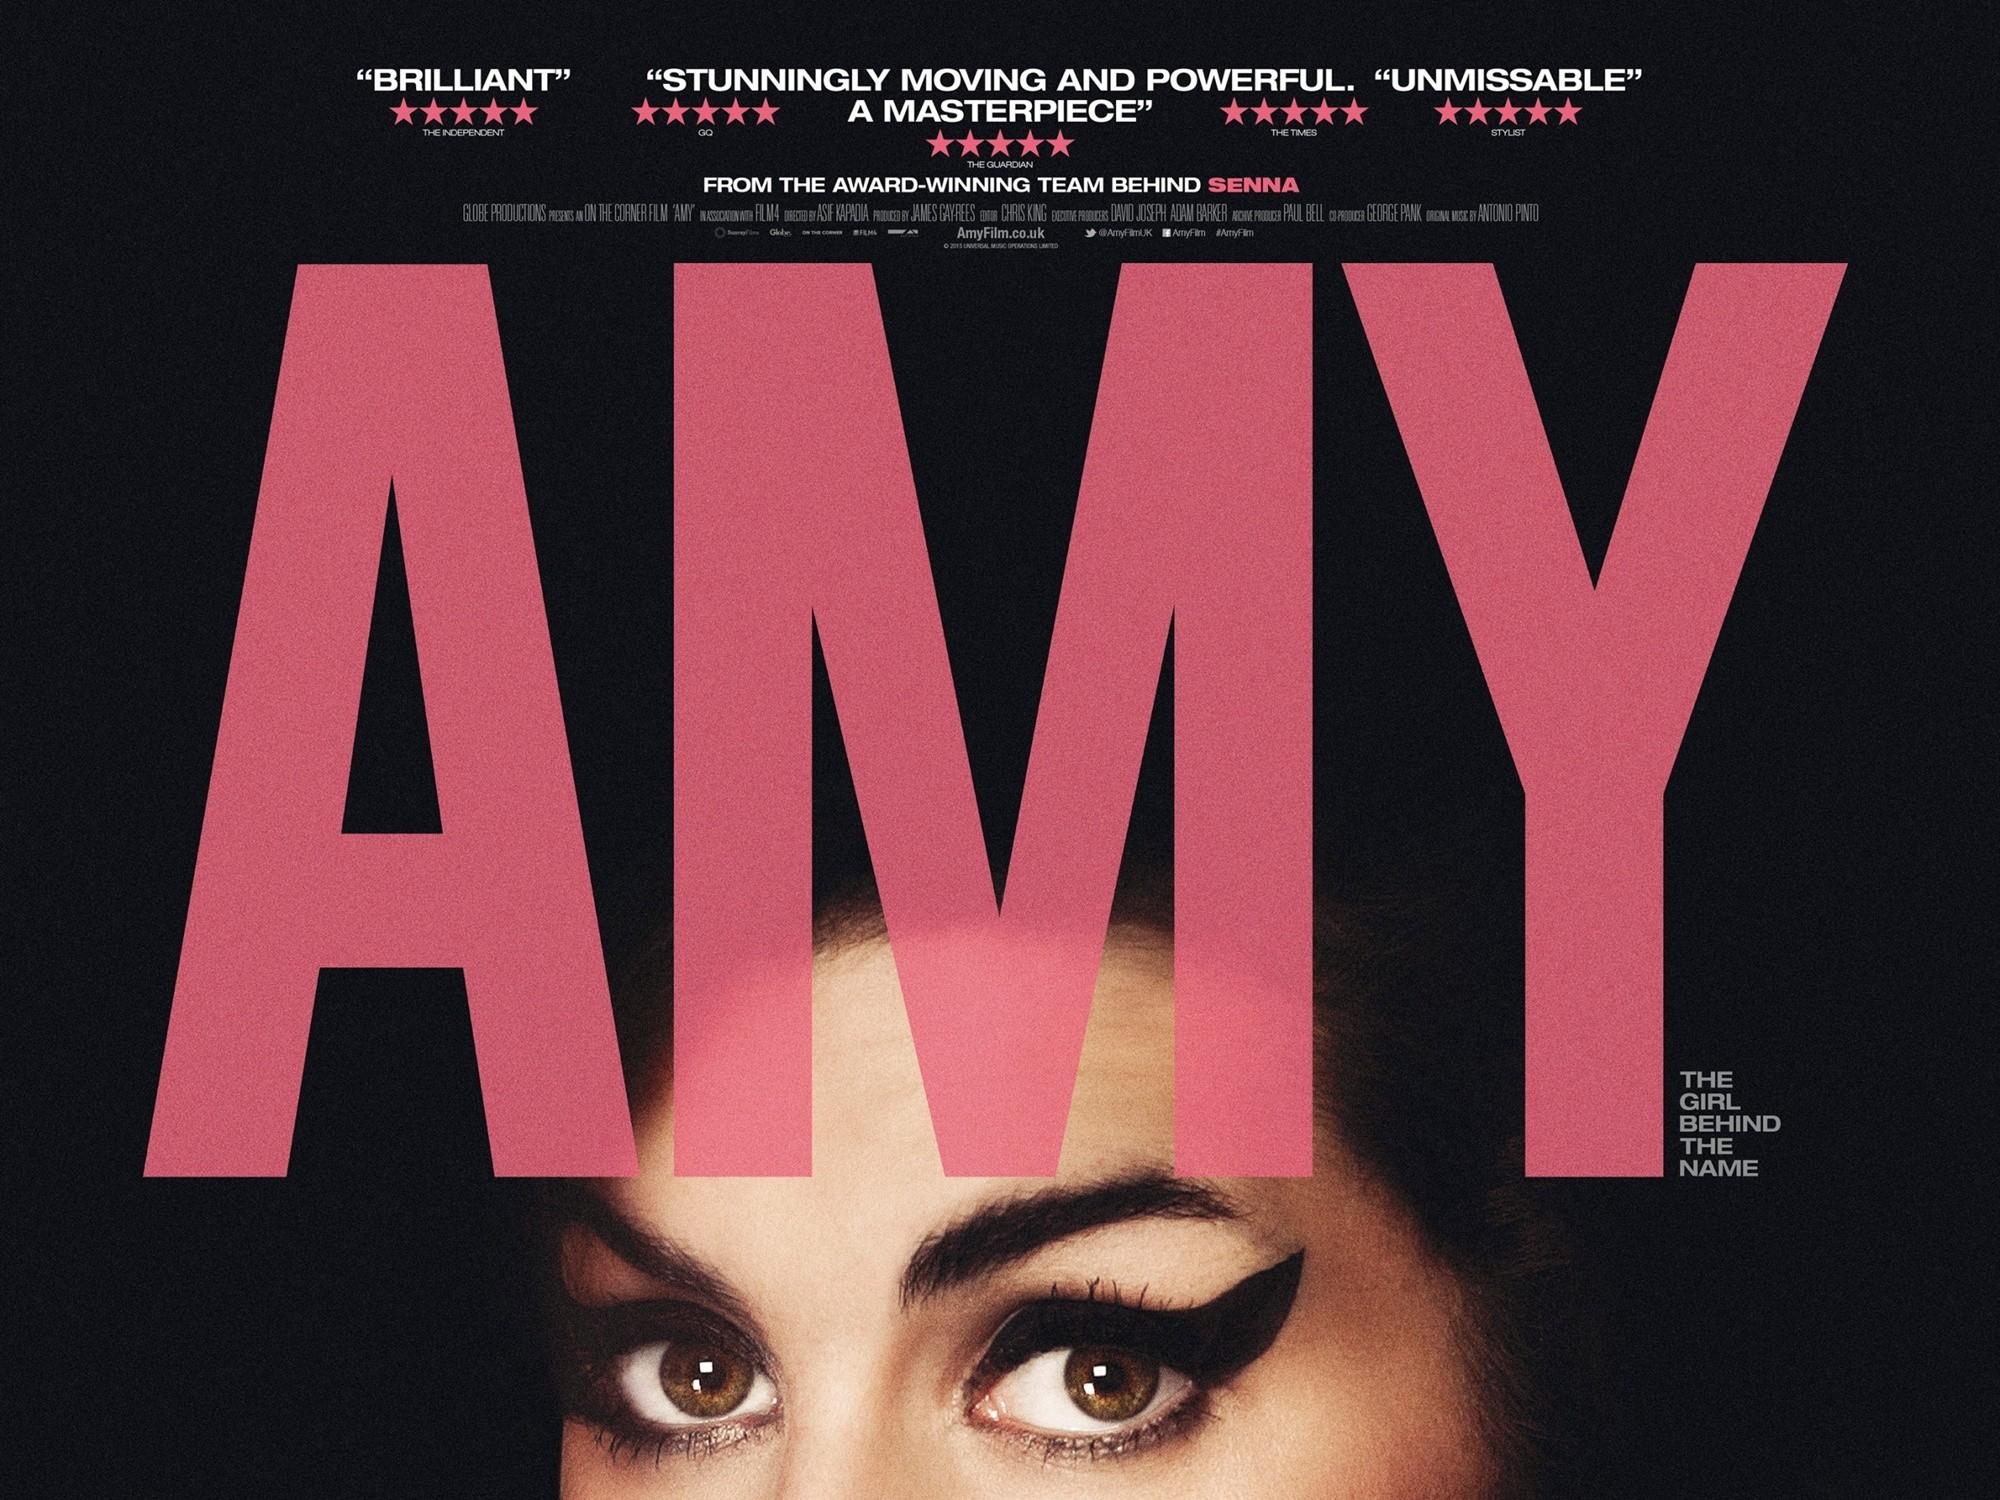 songs for amy movie reviews